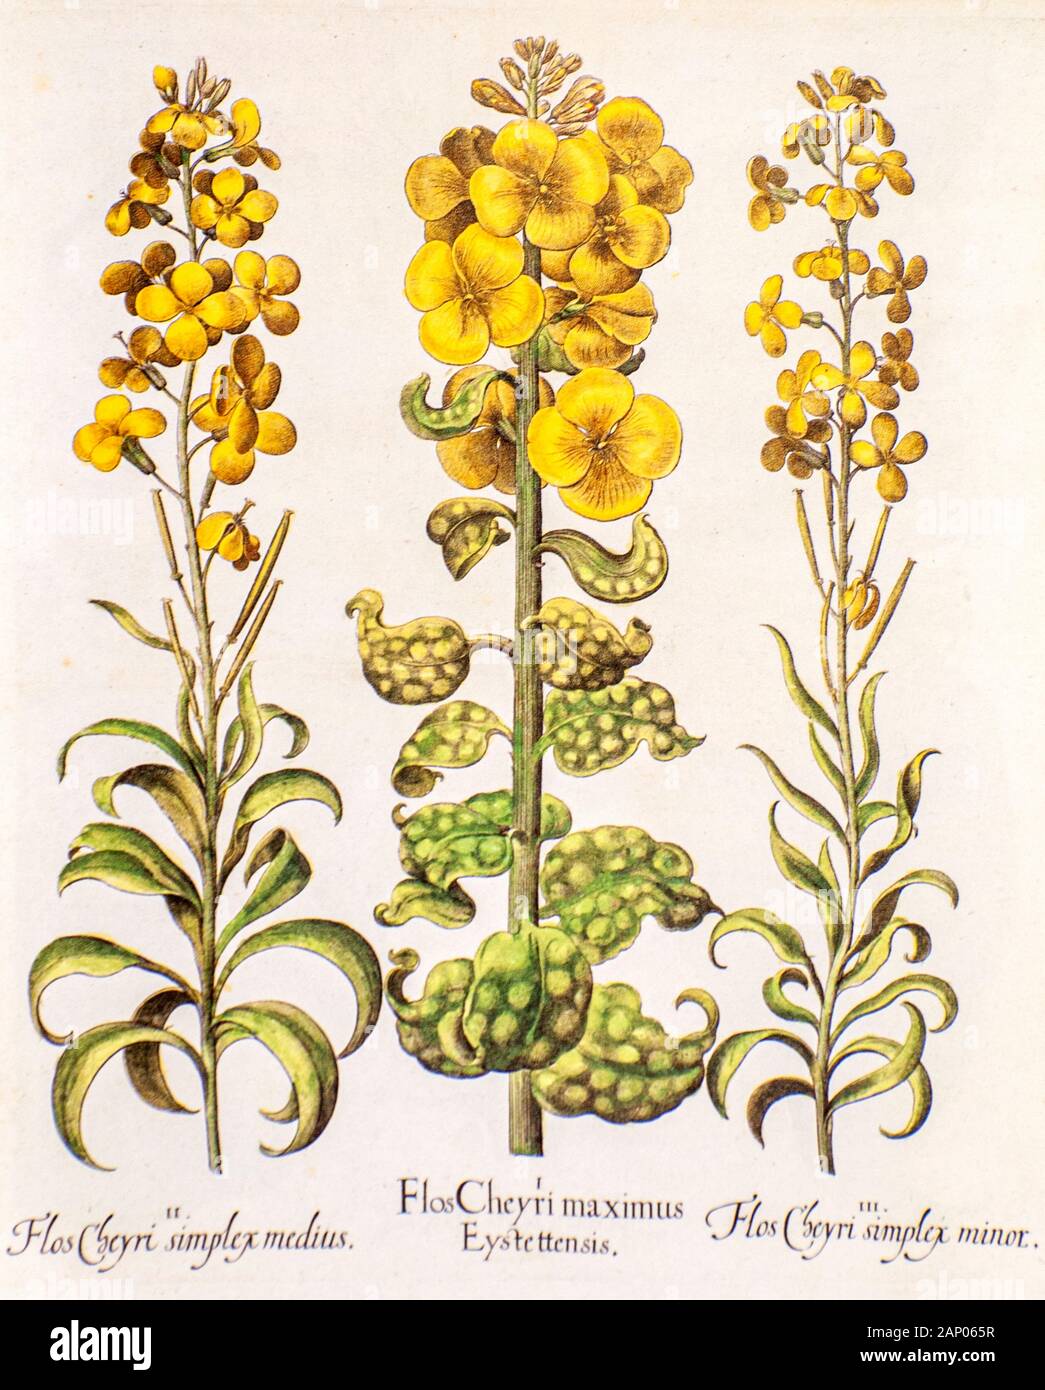 hand painted Hortus Eystettensis (wallflower) from Hortus Eystettensis, a codex produced by Basilius Besler in 1613 of the garden of the bishop of Eic Stock Photo